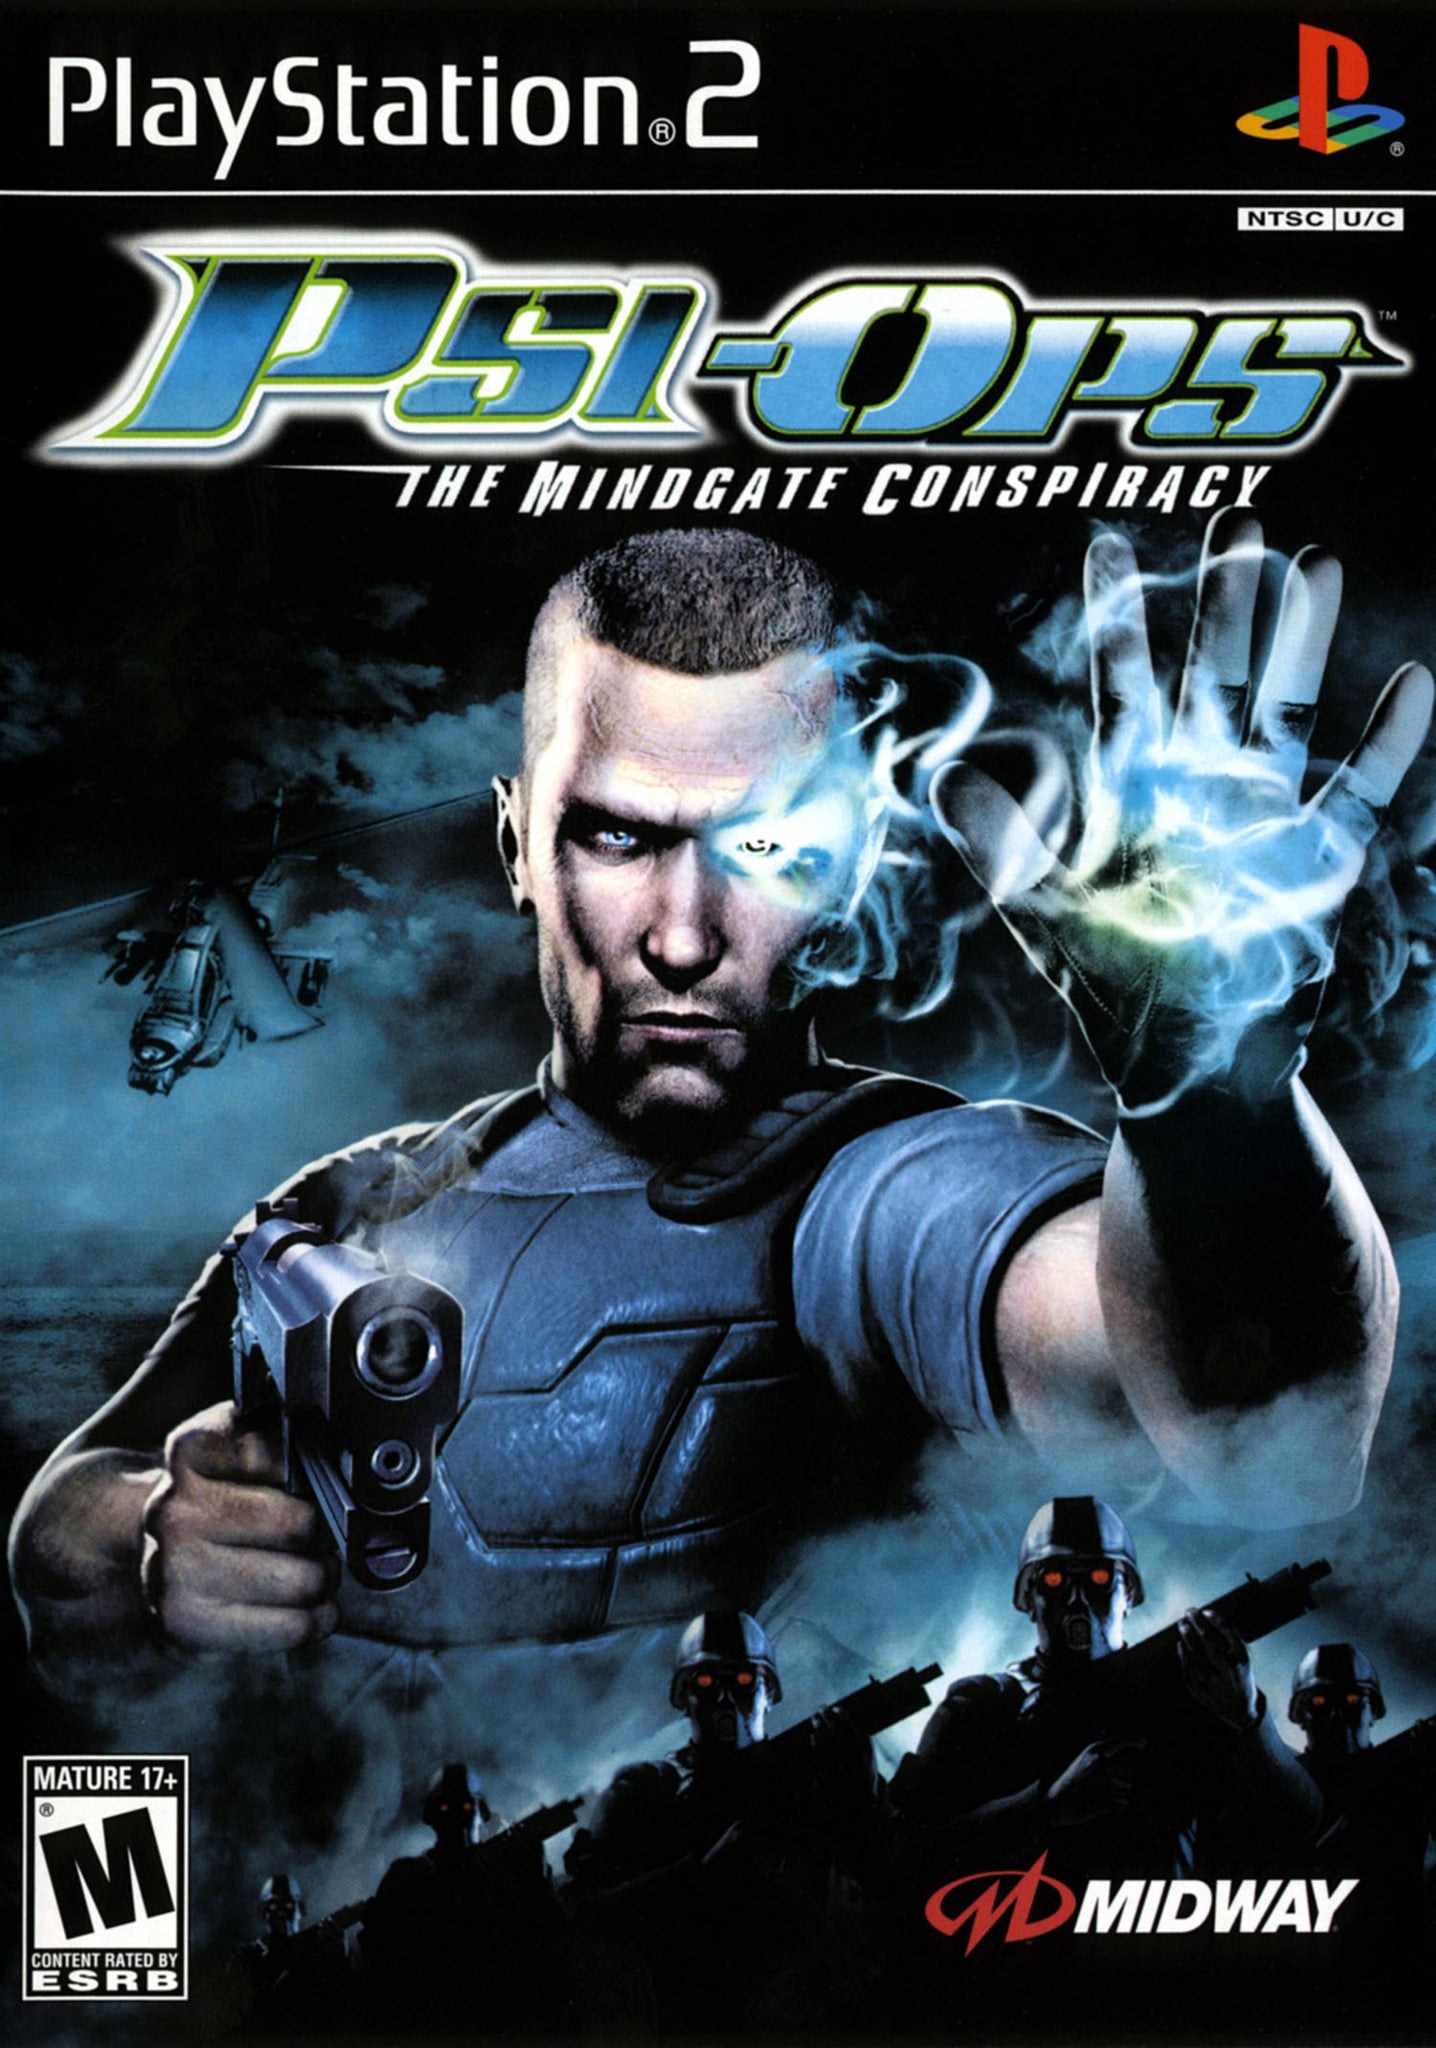 Psi-Ops Mindgate Conspiracy - PS2 (Pre-owned)